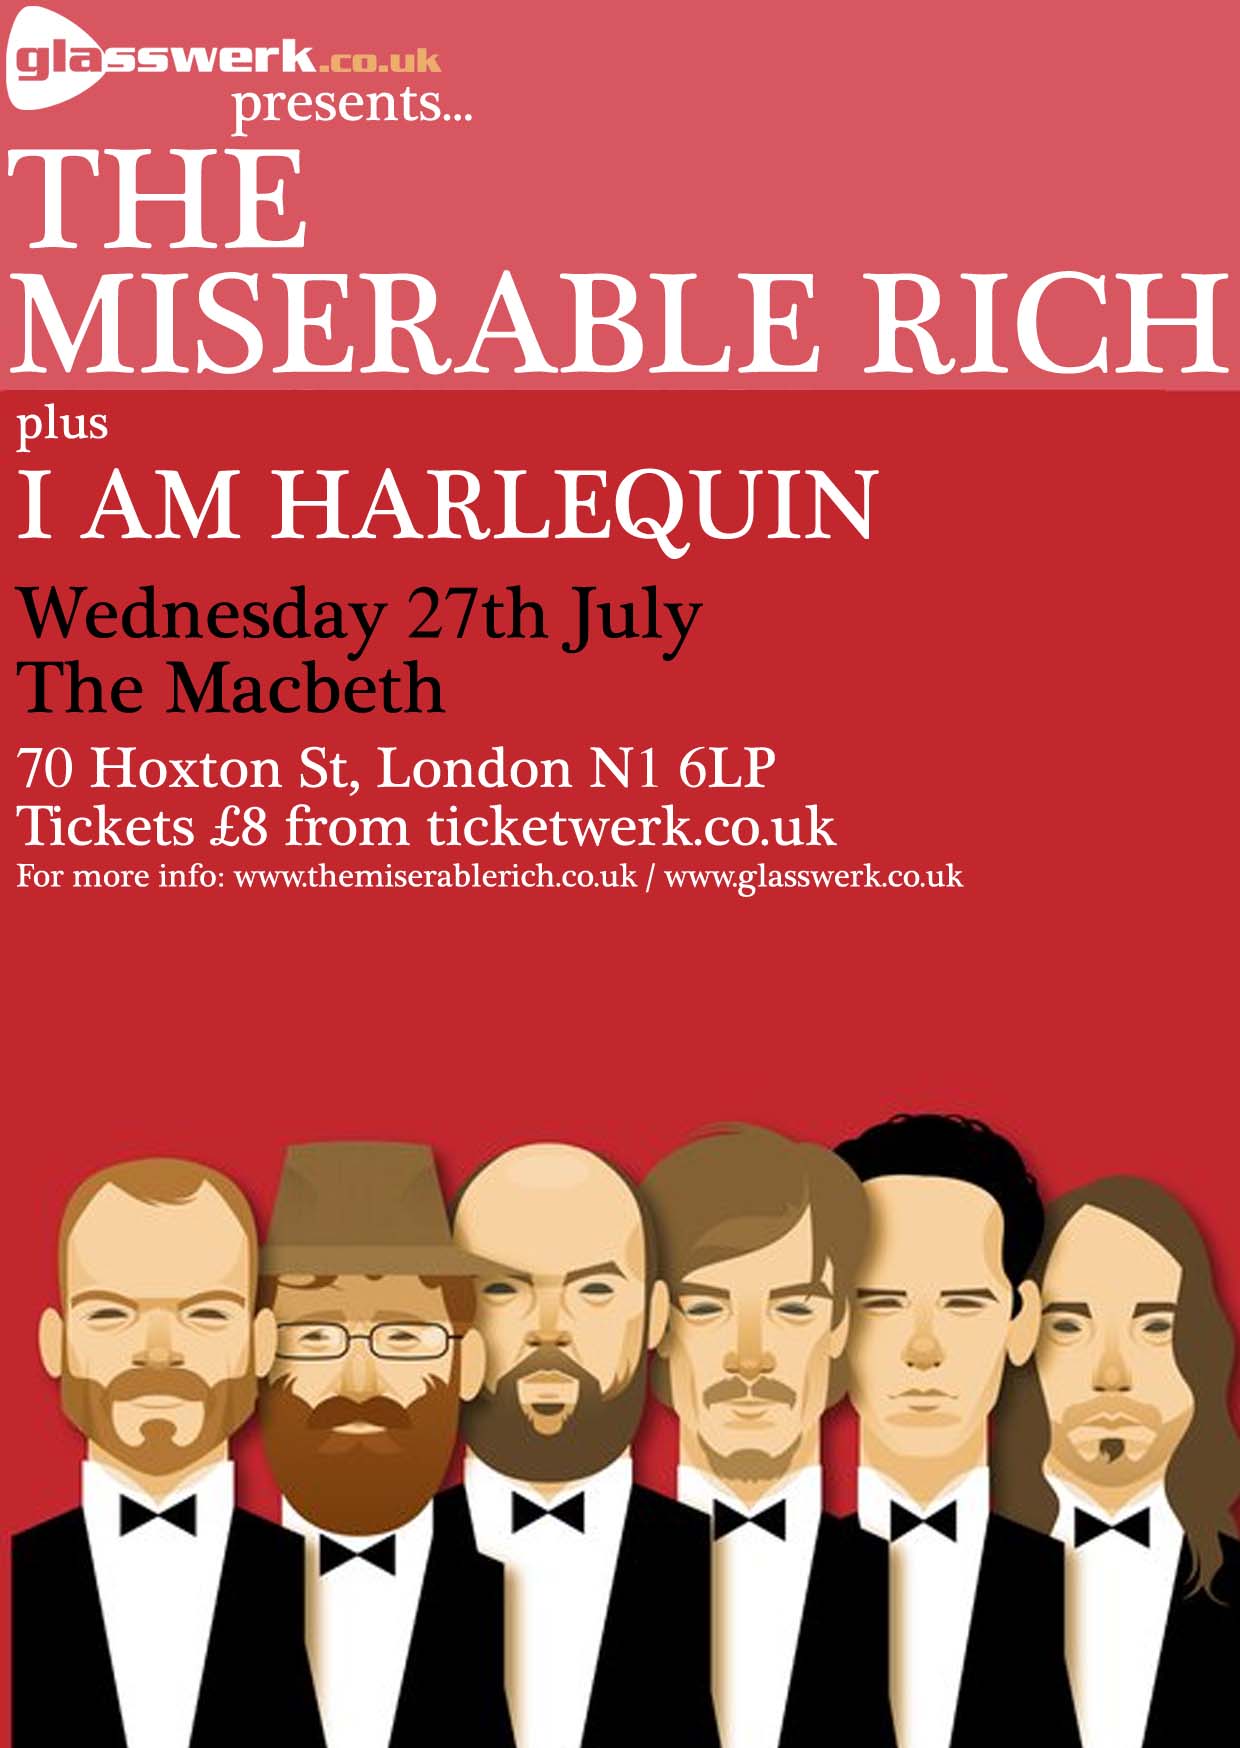 The Miserable Rich - The Macbeth